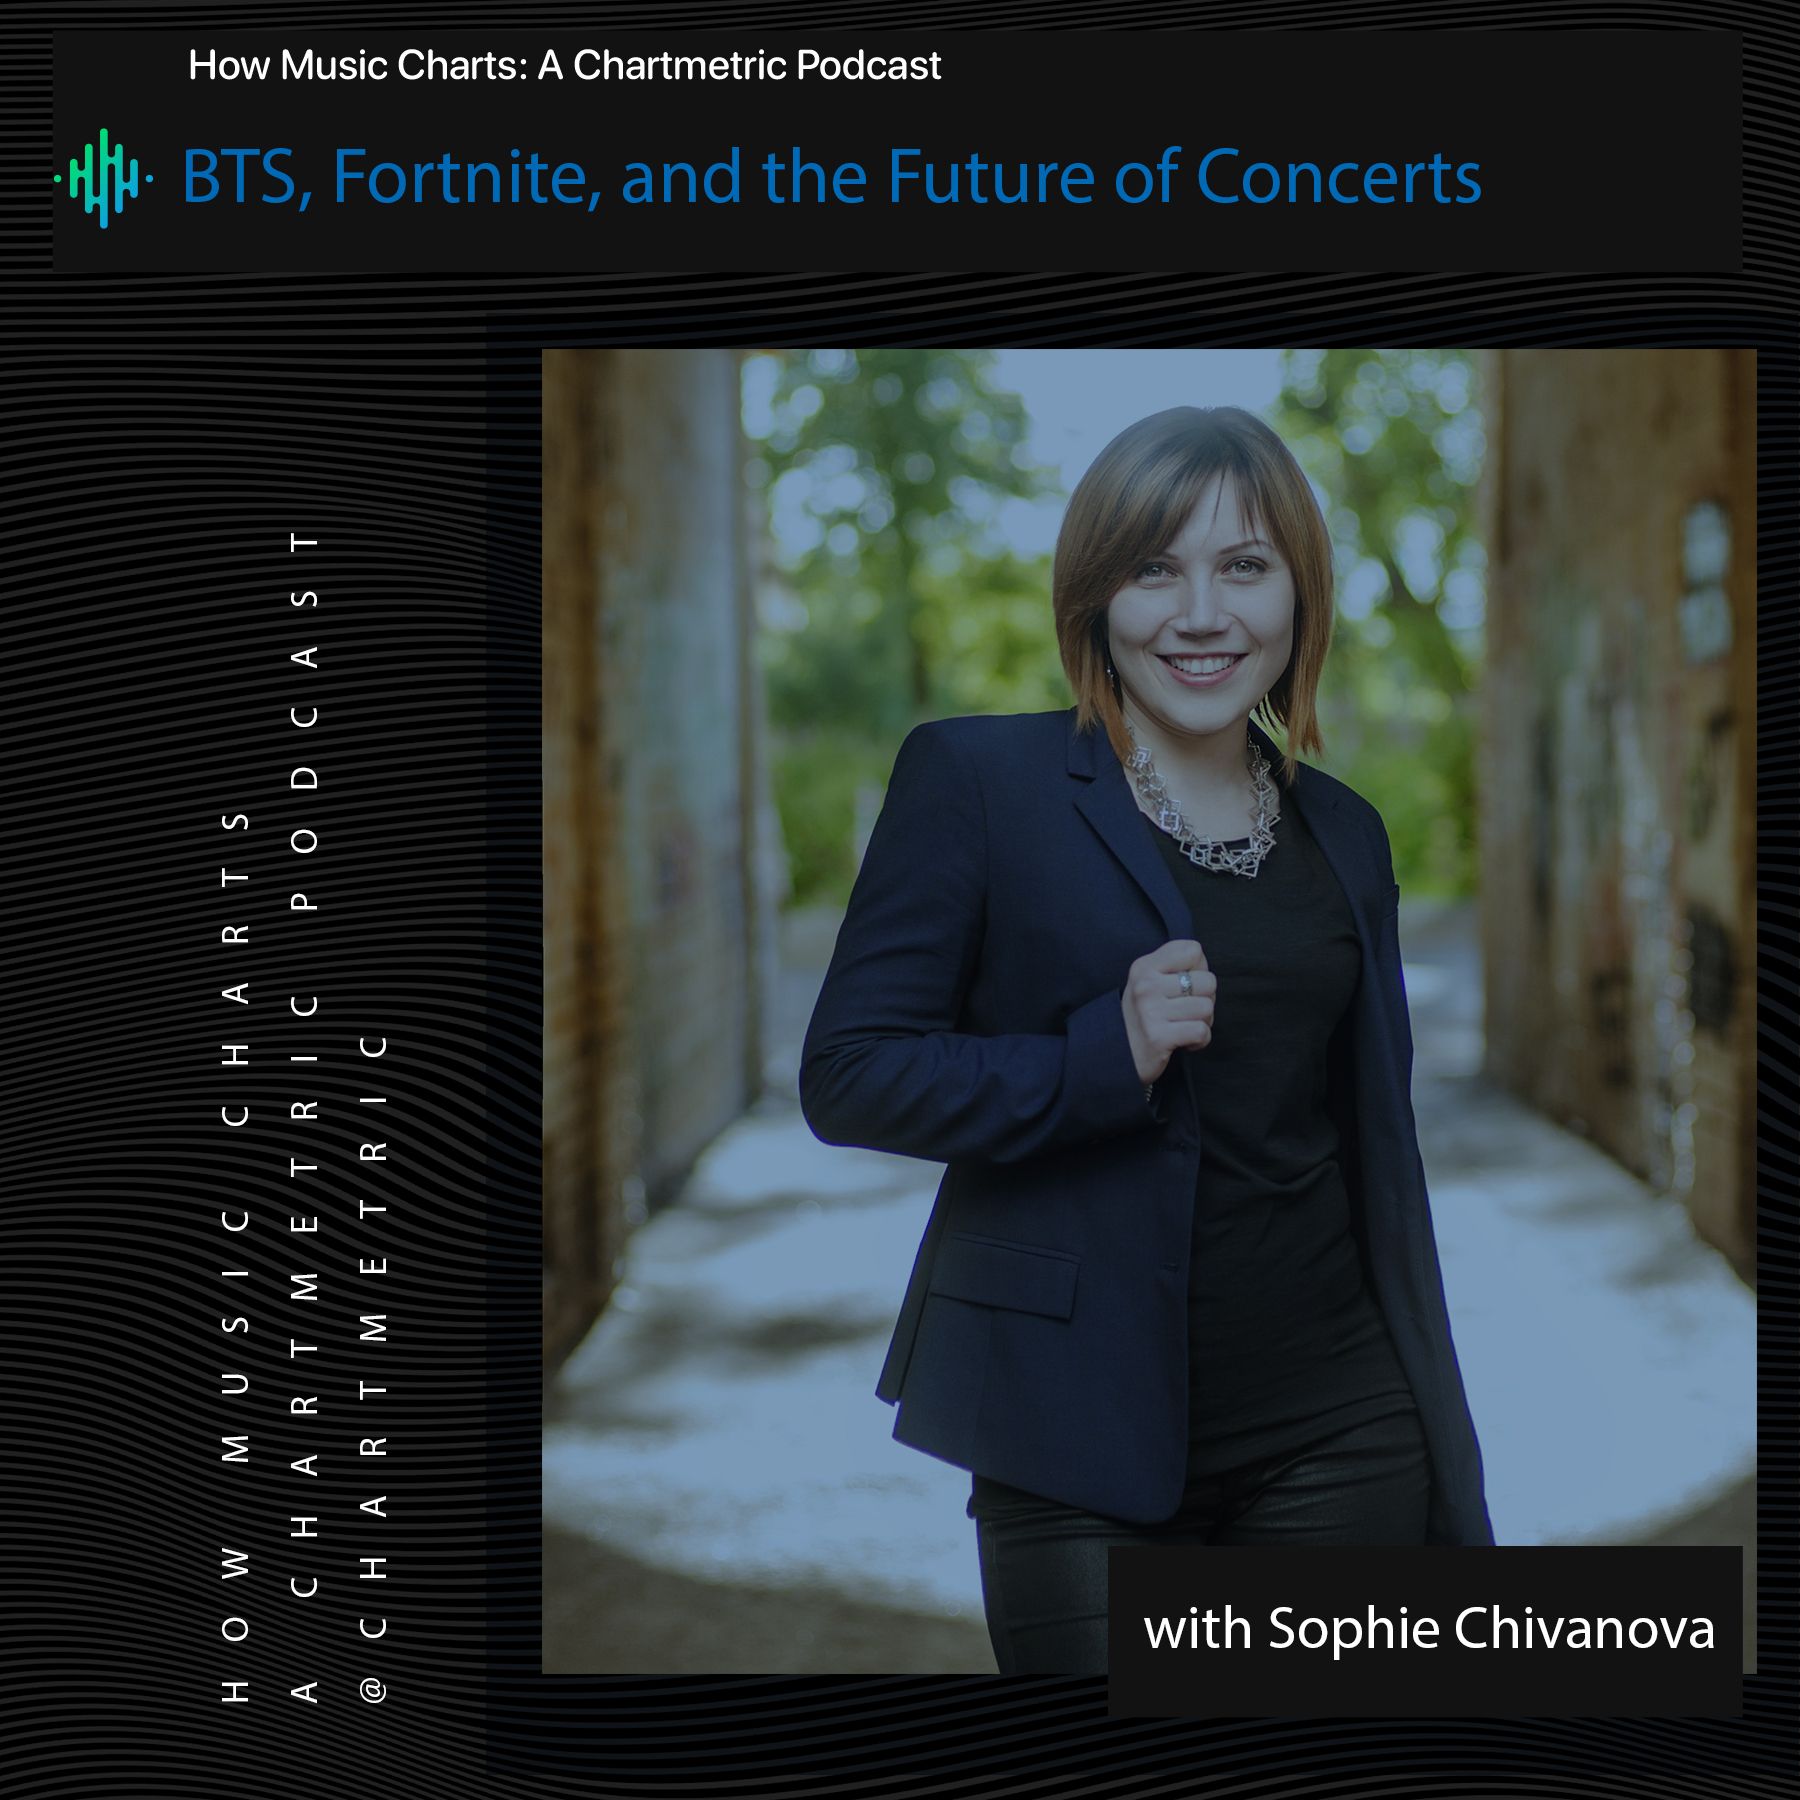 BTS, Fortnite, and the Future of Concerts With Sophie Chivanova